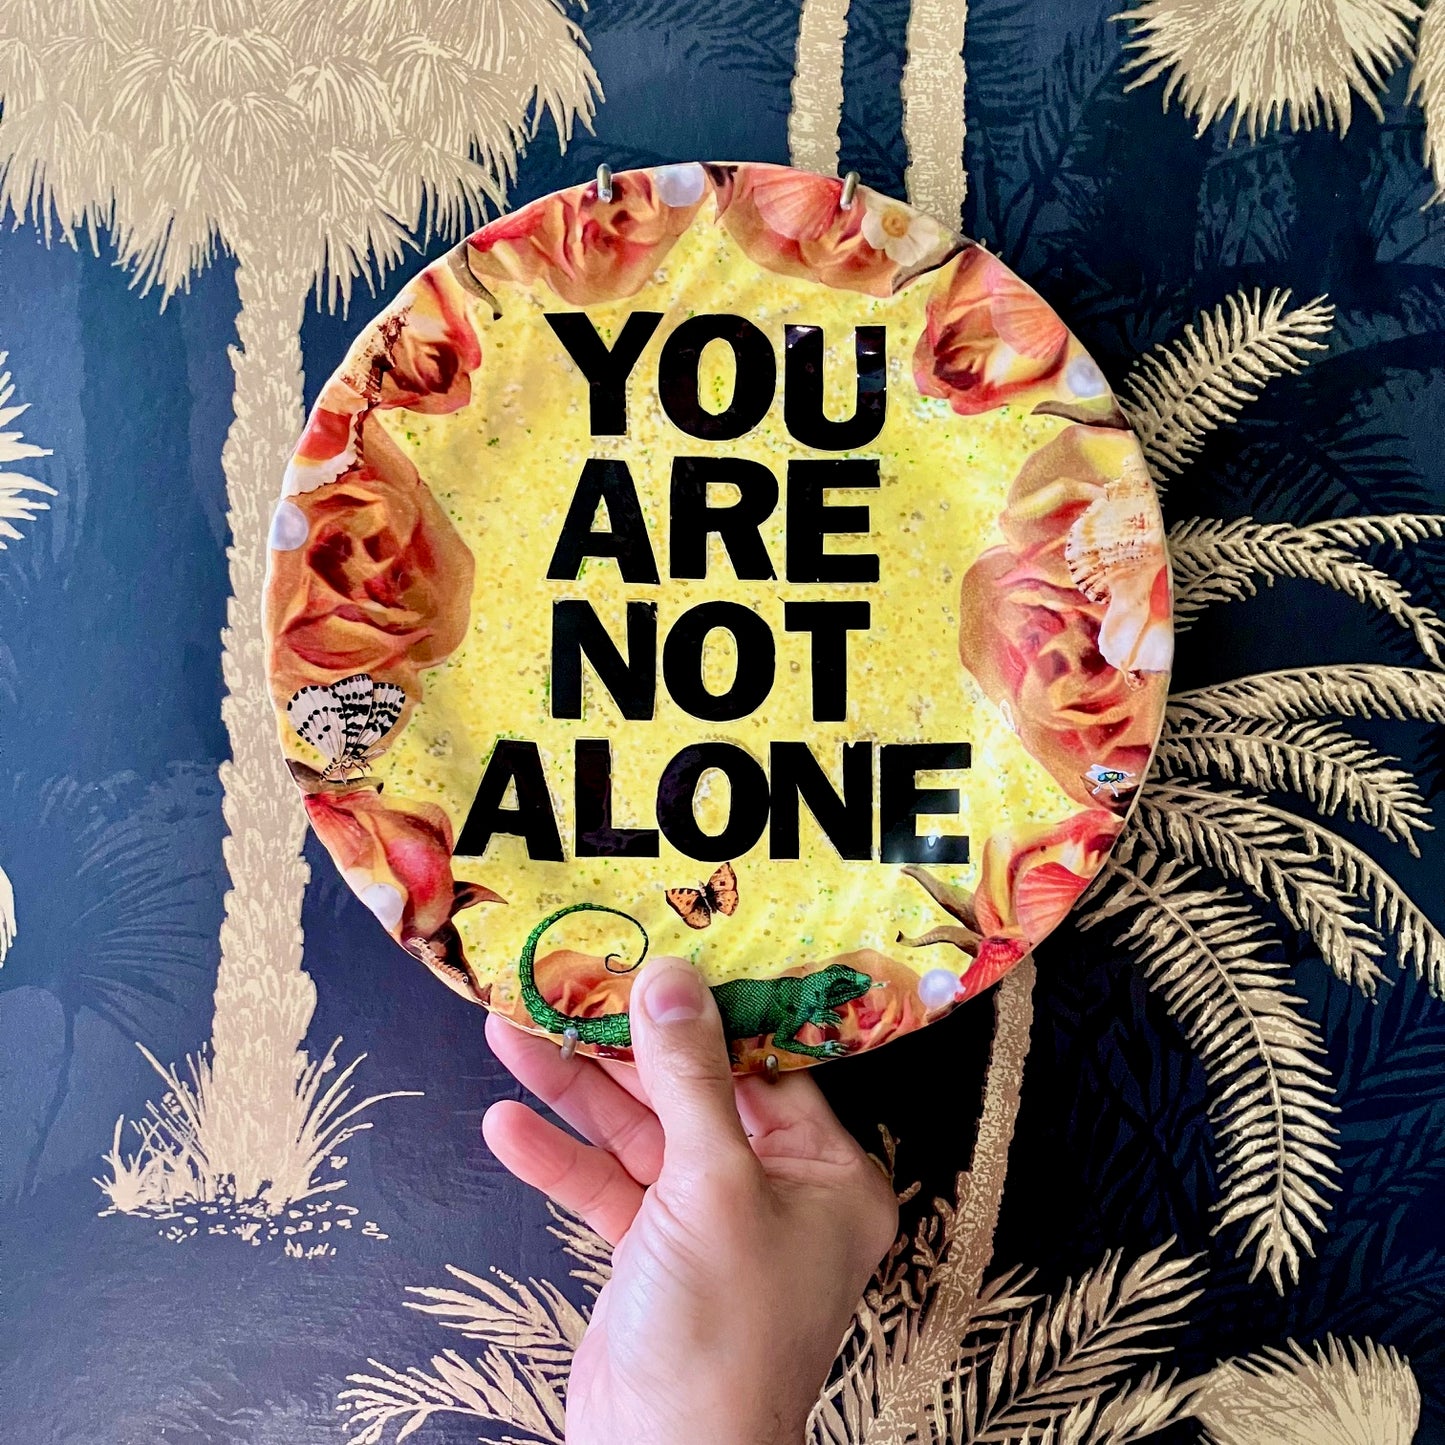 "You Are Not Alone" one-of-a-kind collage artwork Wall Plate by House of Frisson. Featuring the words "You Are Not Alone" framed by roses, pearls, and moths, on a yellow background. Holding the plate against a wallpaper.